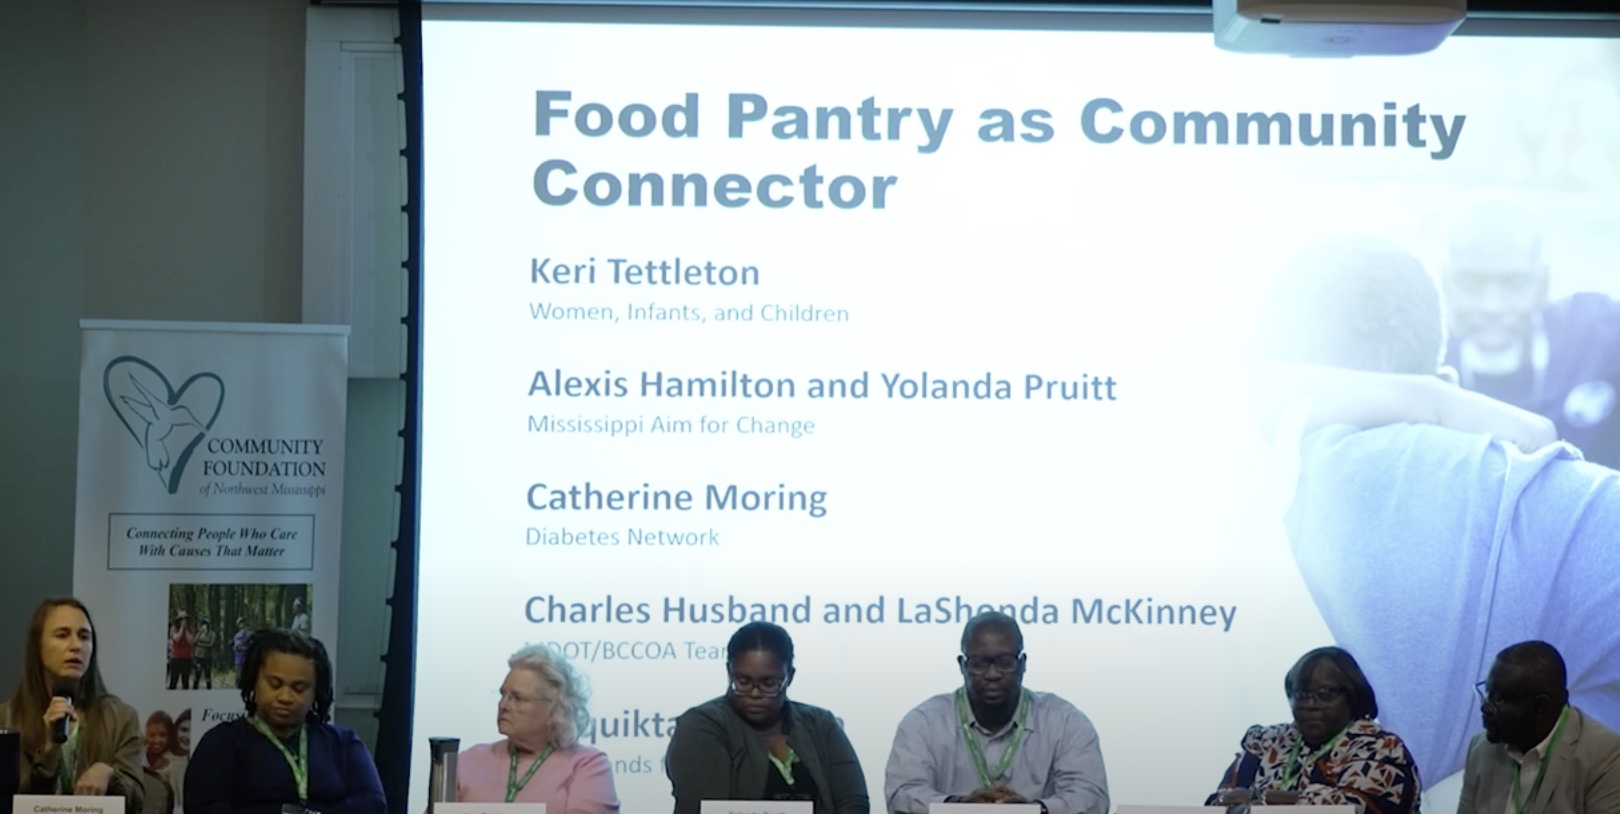 Food Pantry as Community Connector panels